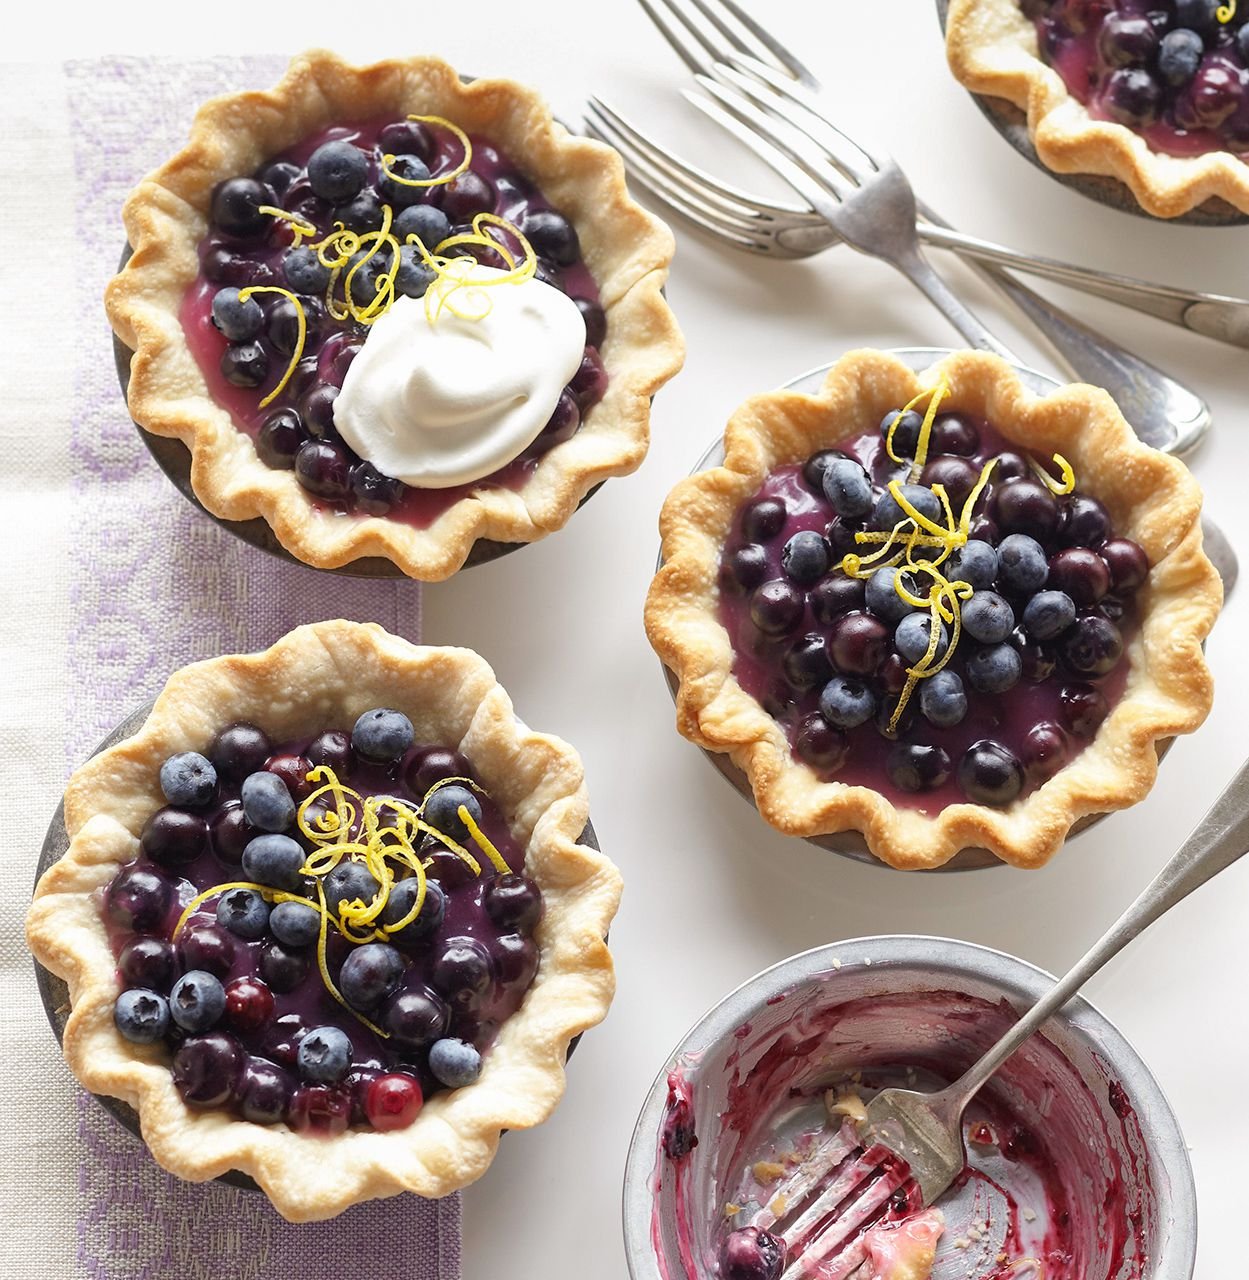 14 Berry Pie Recipes That Are a Slice Above the Rest